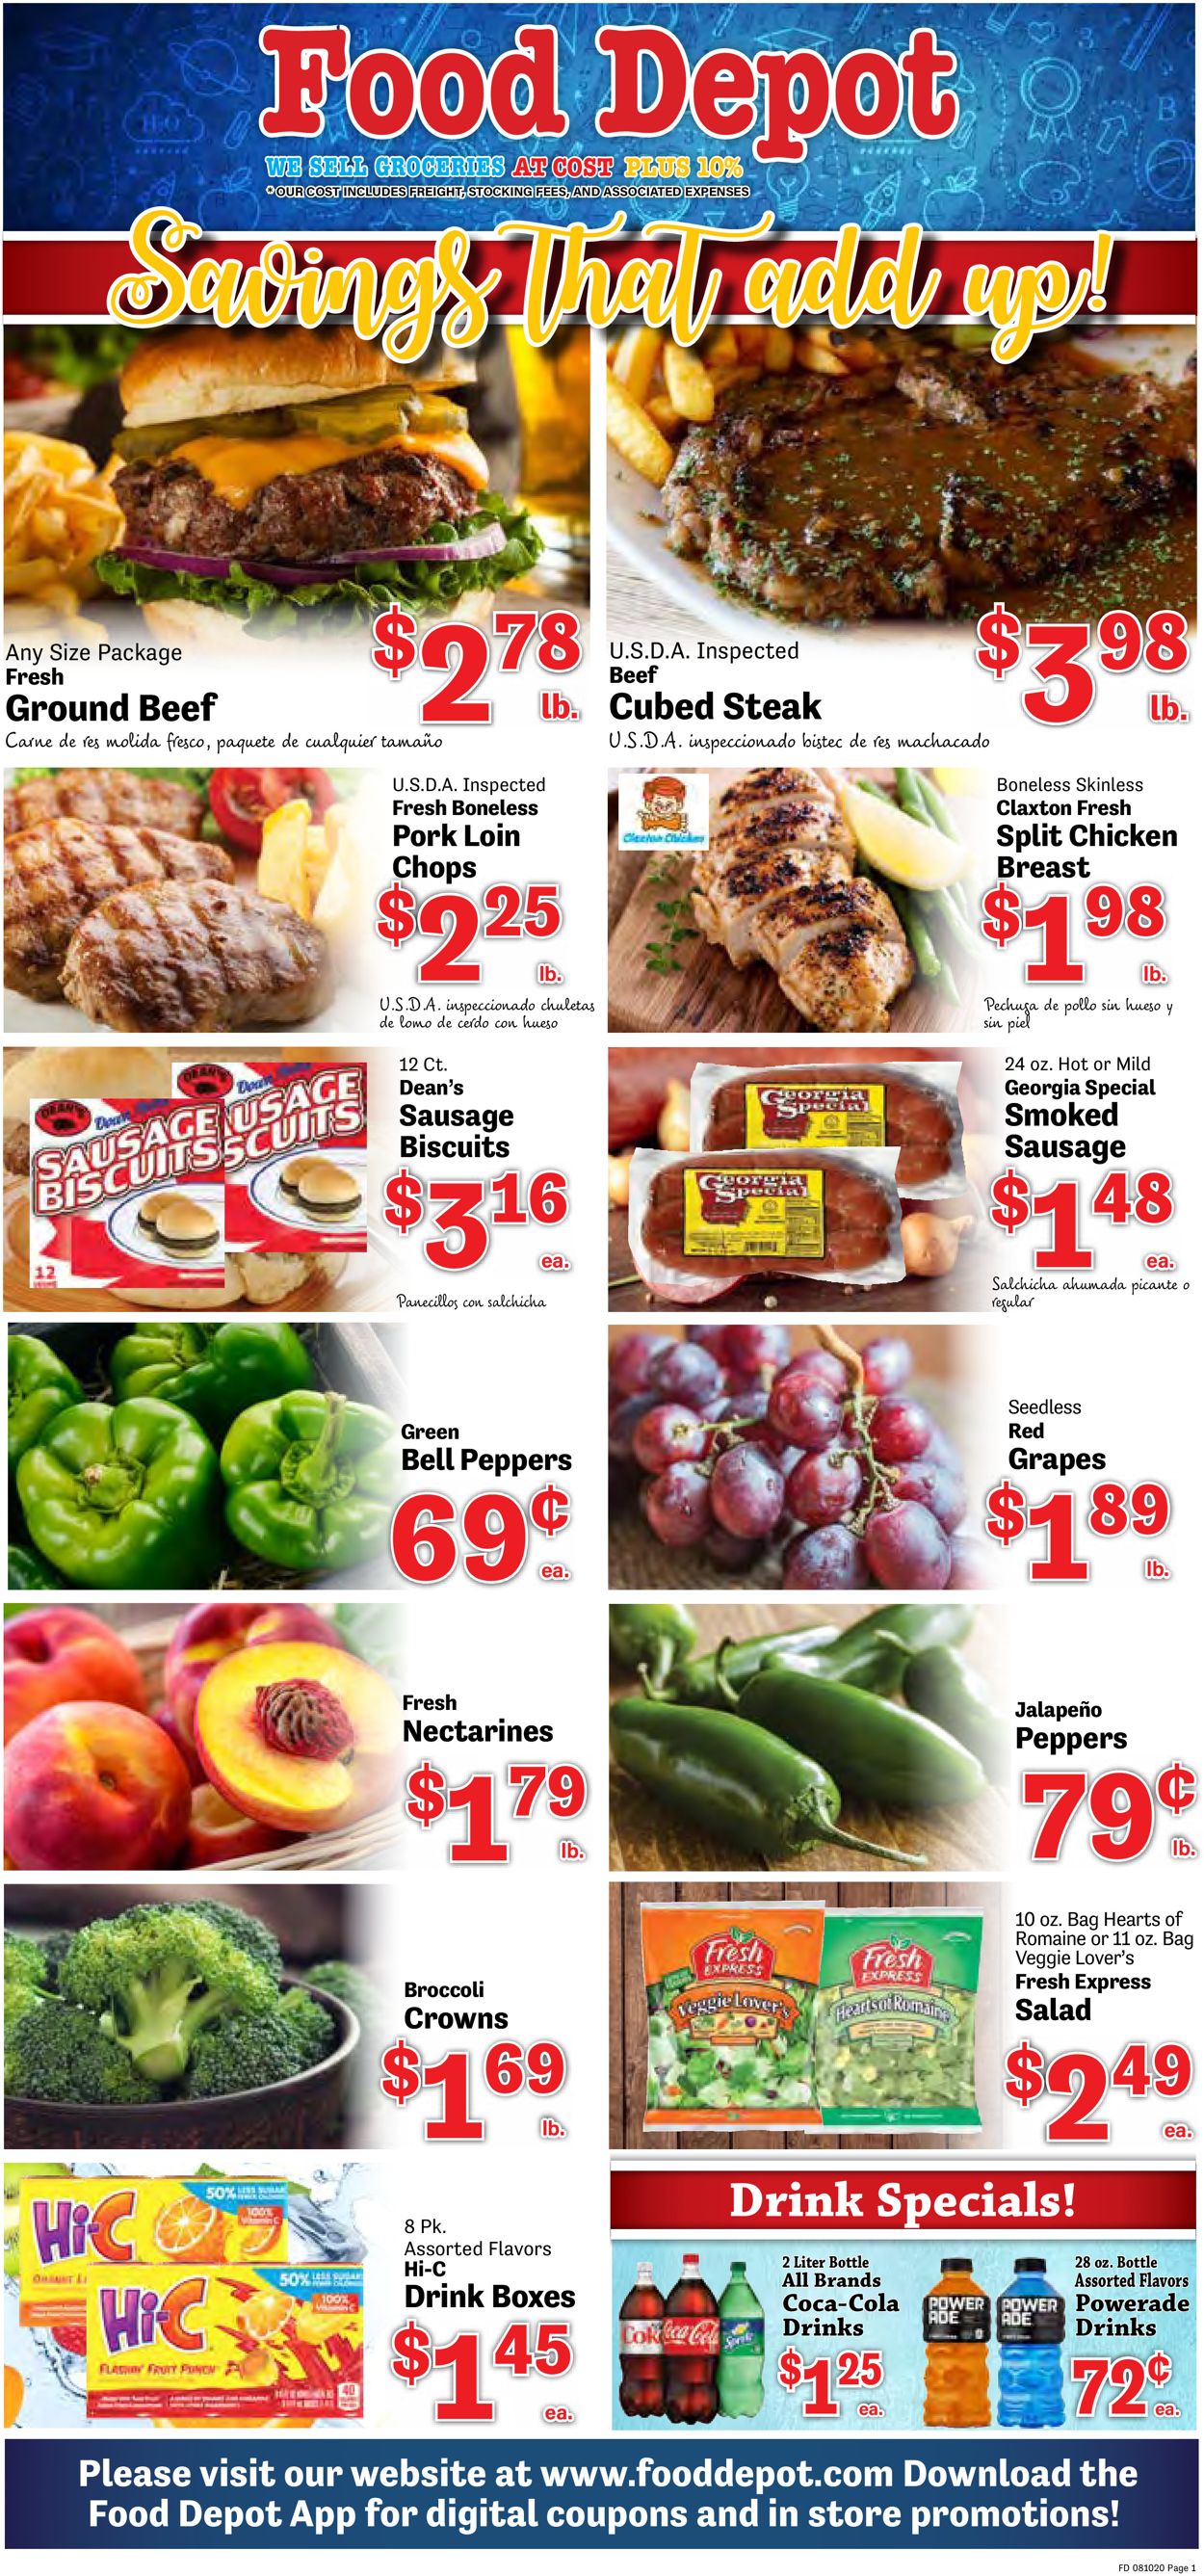 Food Depot Current weekly ad 08/10 08/16/2020 frequent ads com